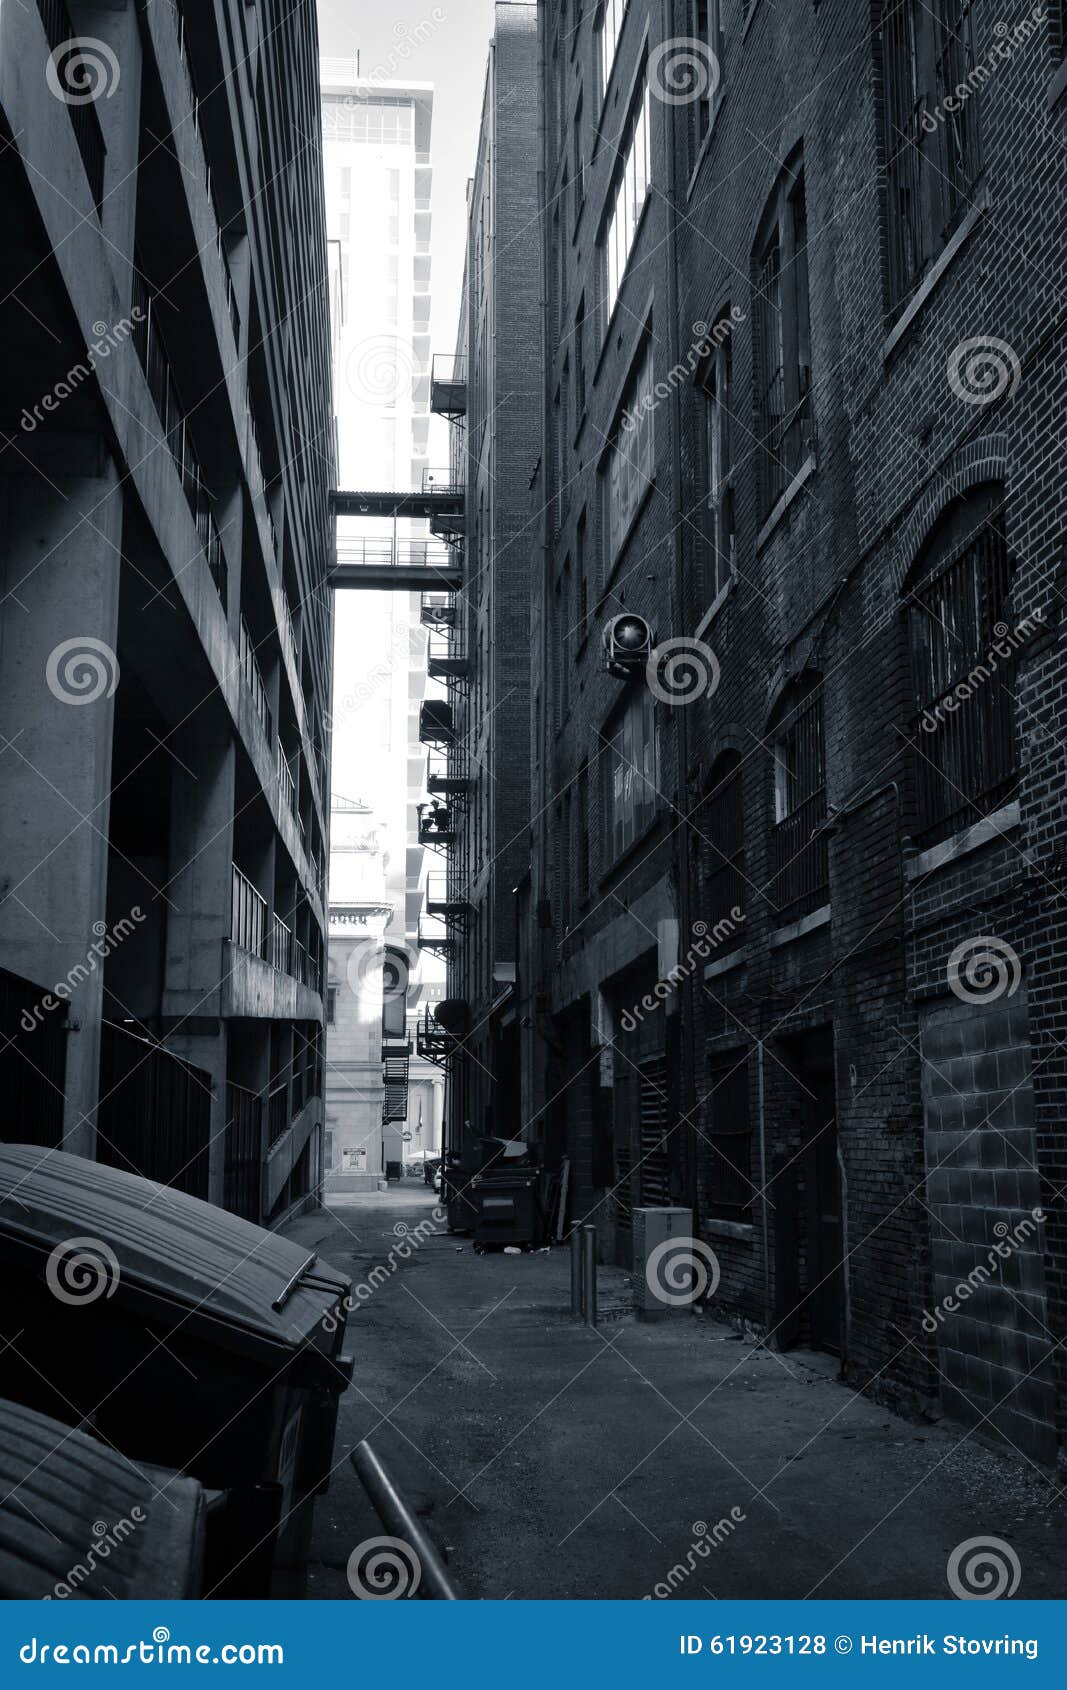 St. Louis back alley stock photo. Image of containers - 61923128